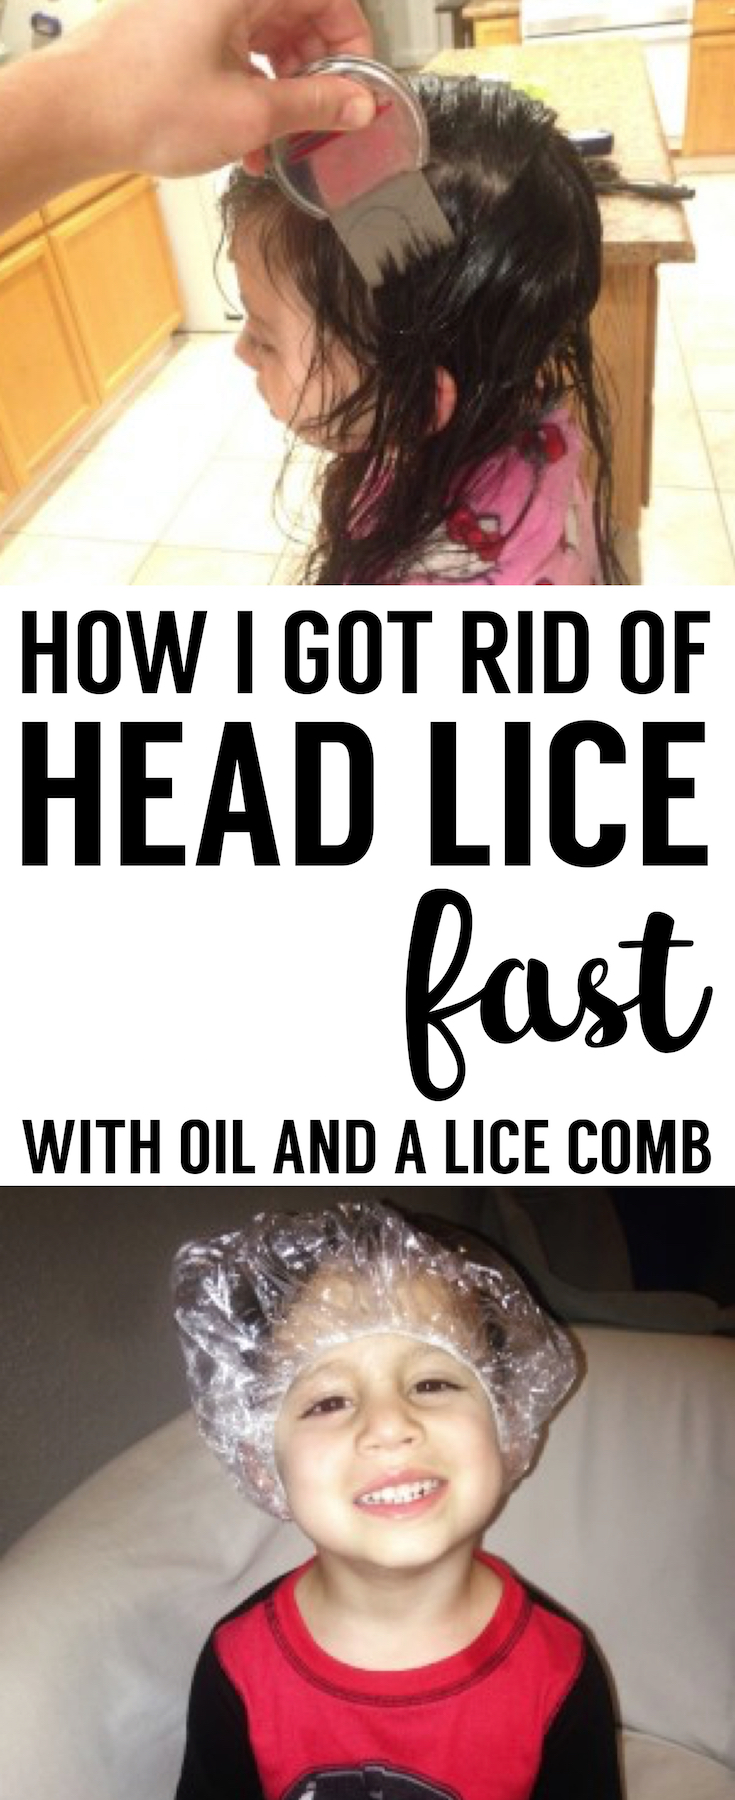 How to get rid of head lice fast! What I learned when my daughter got lice. How we got rid of lice and nits quickly with oil and a lice comb.